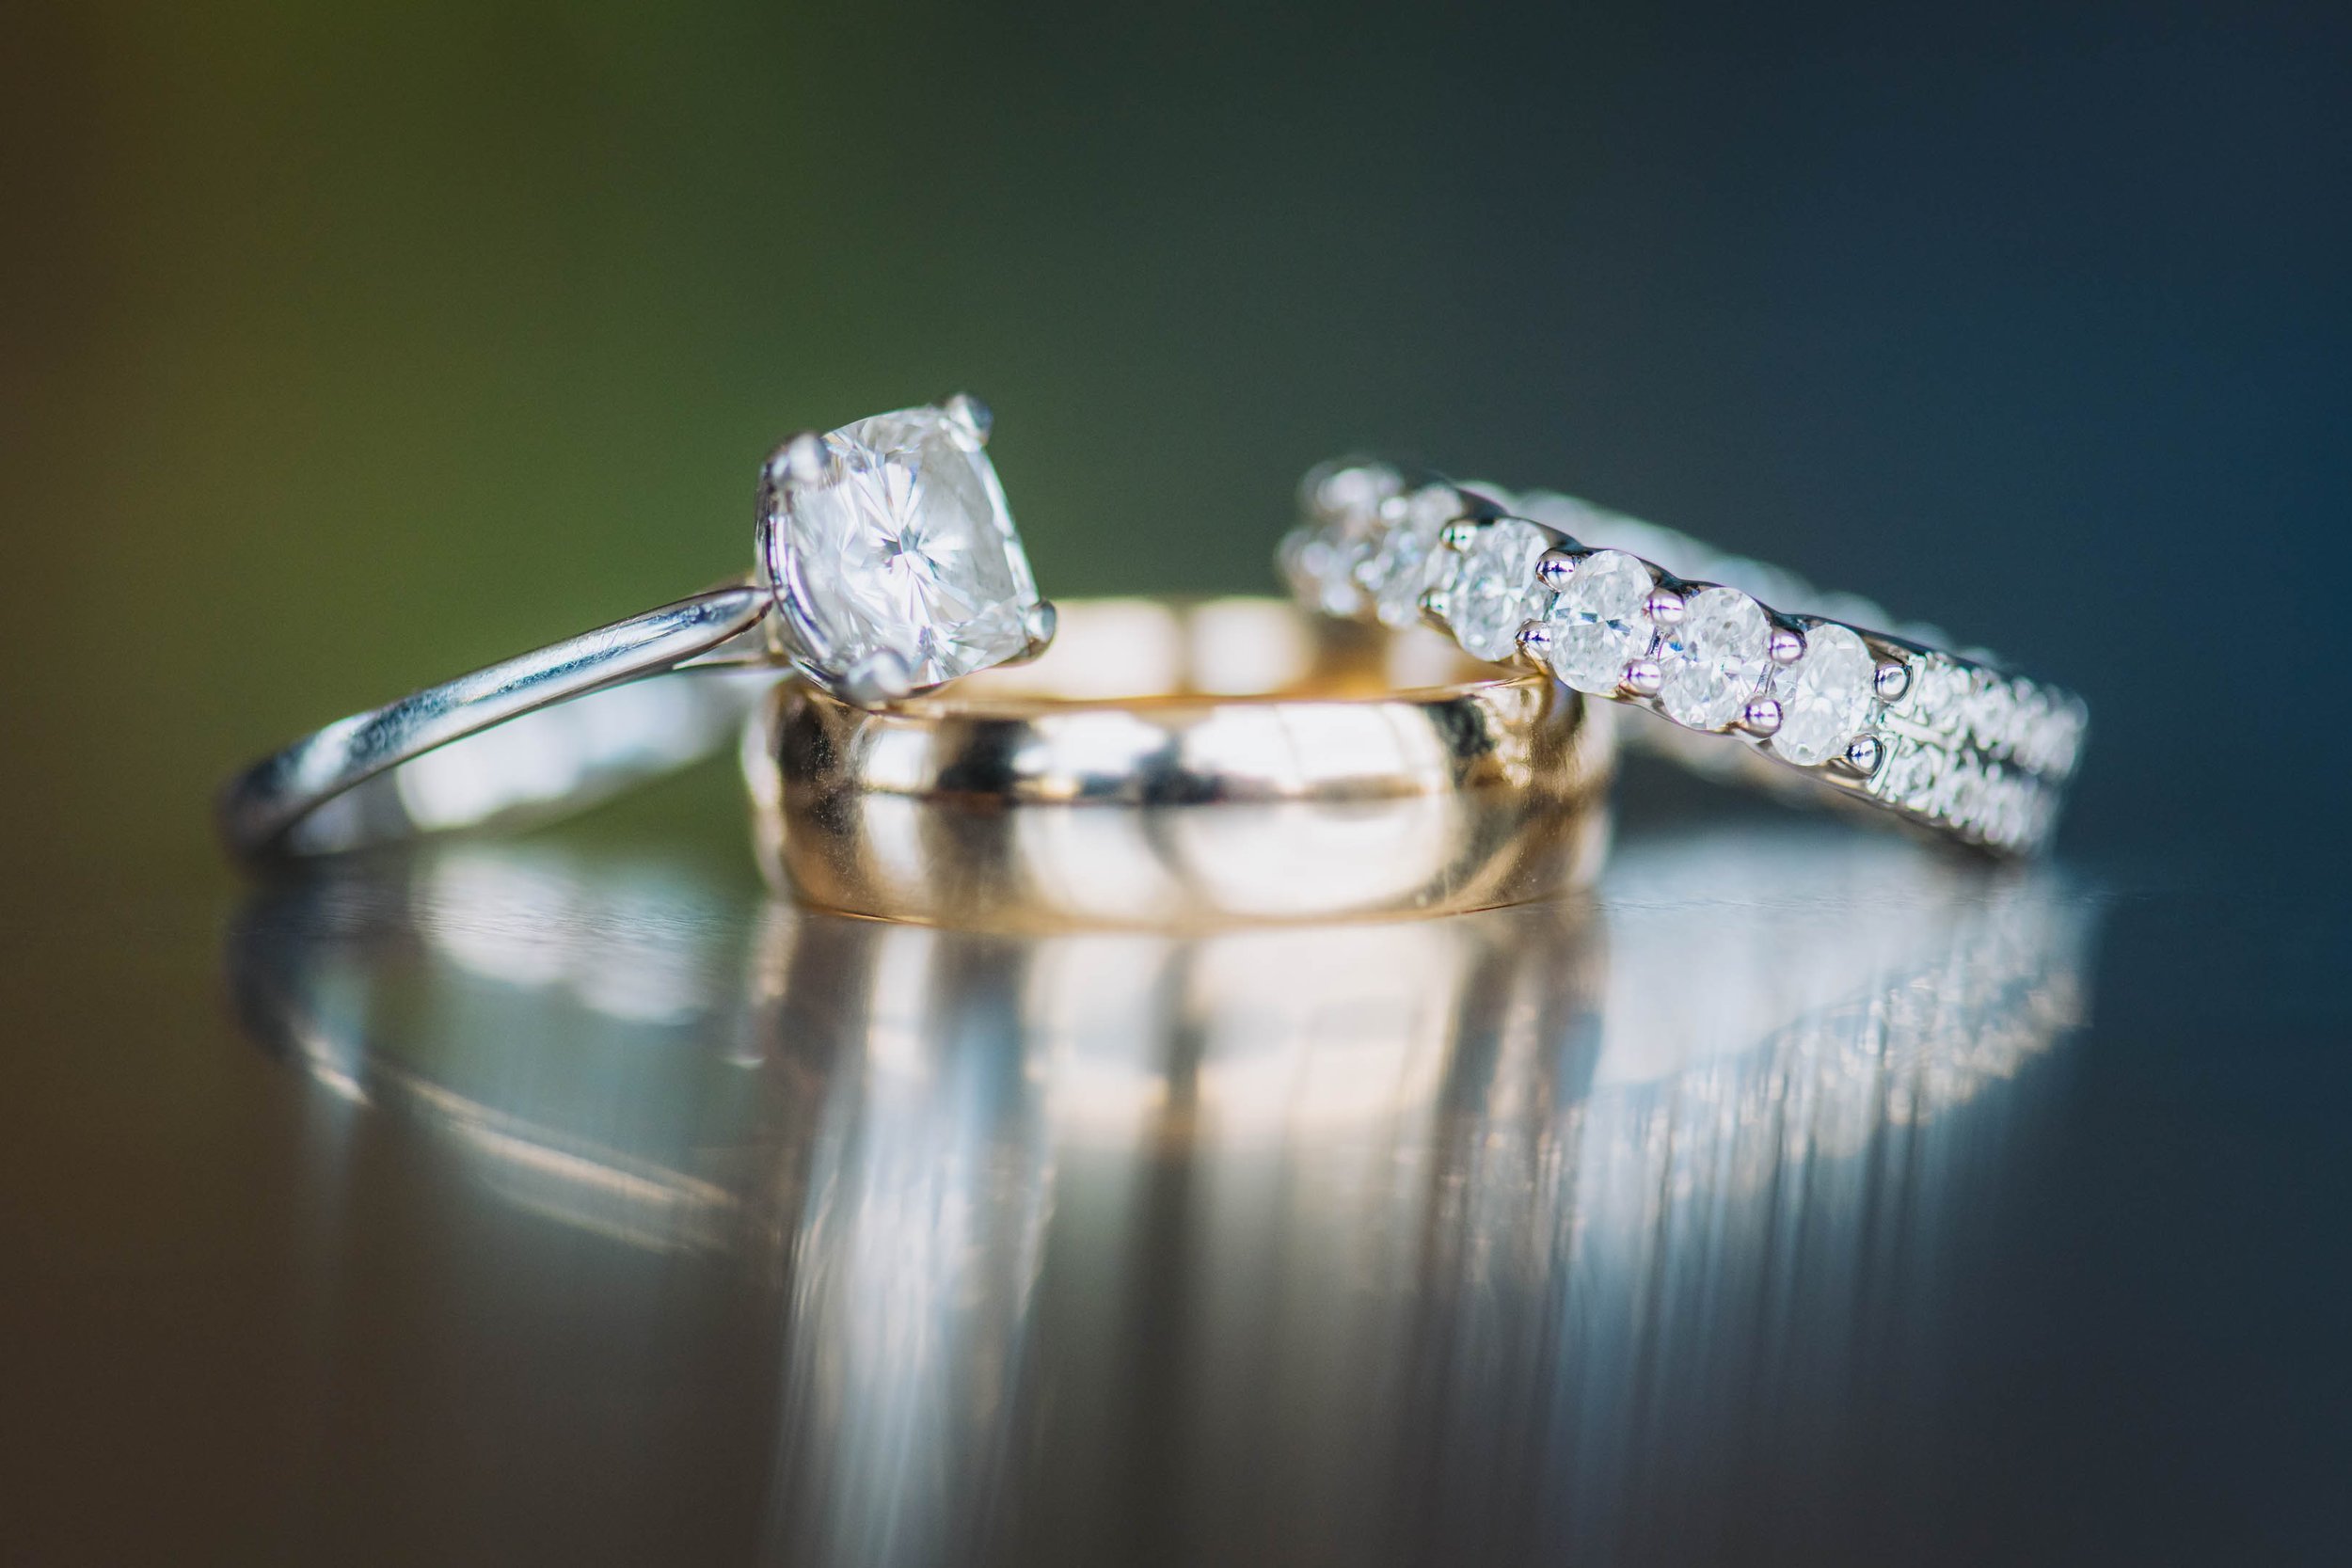 Top Wedding Photographers Near Me | Ravenswood Event Center | J. Brown Photography | detail photo of wedding bands